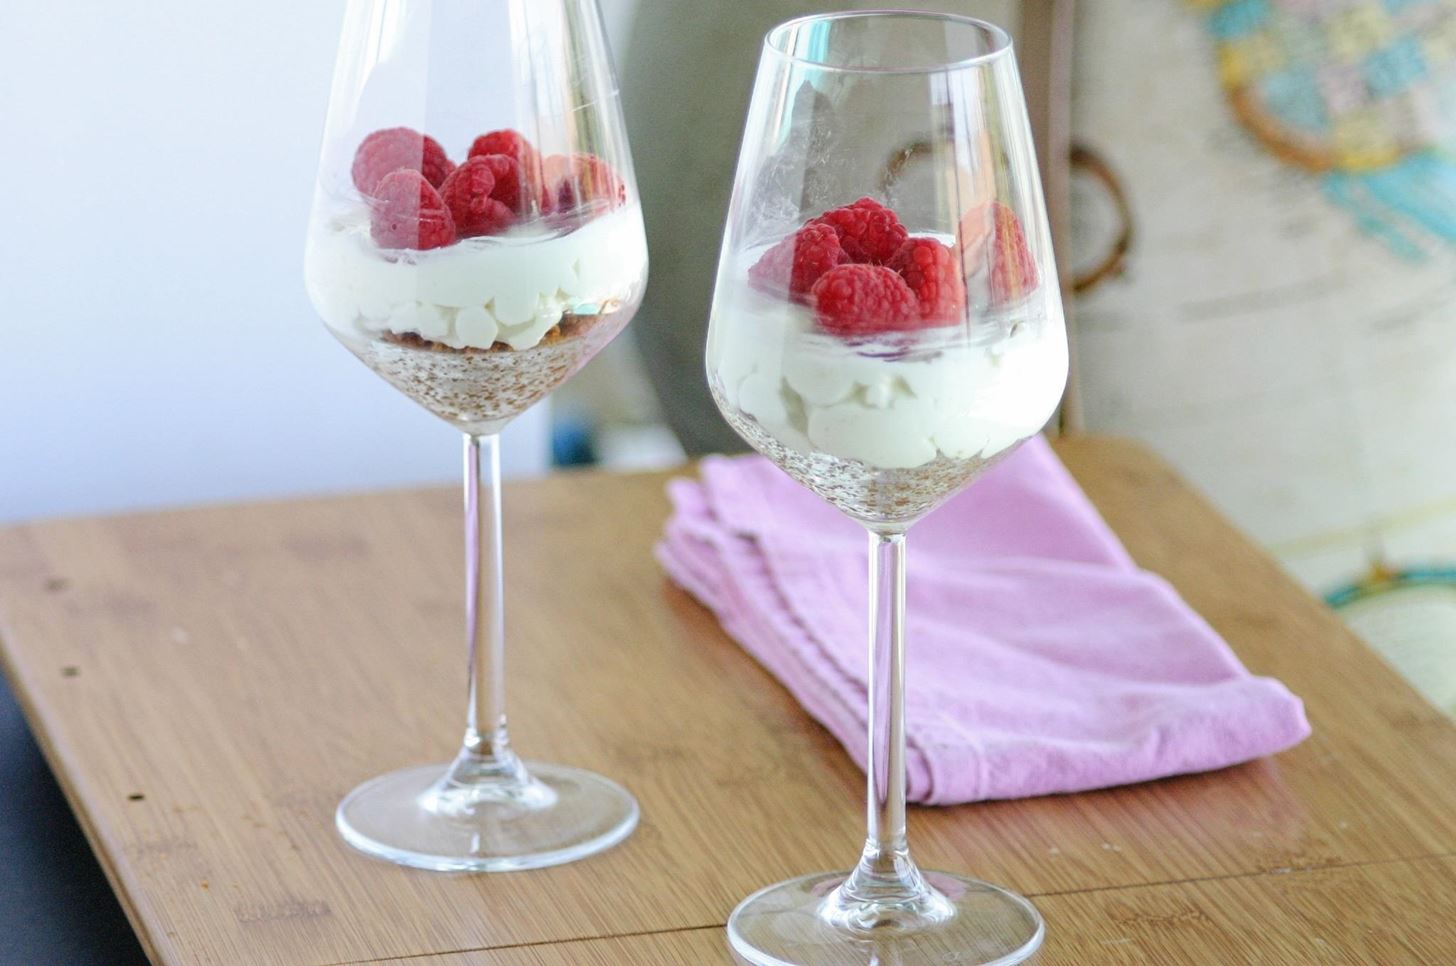 Get Your Cheesecake Fix with These 10-Minute Parfaits